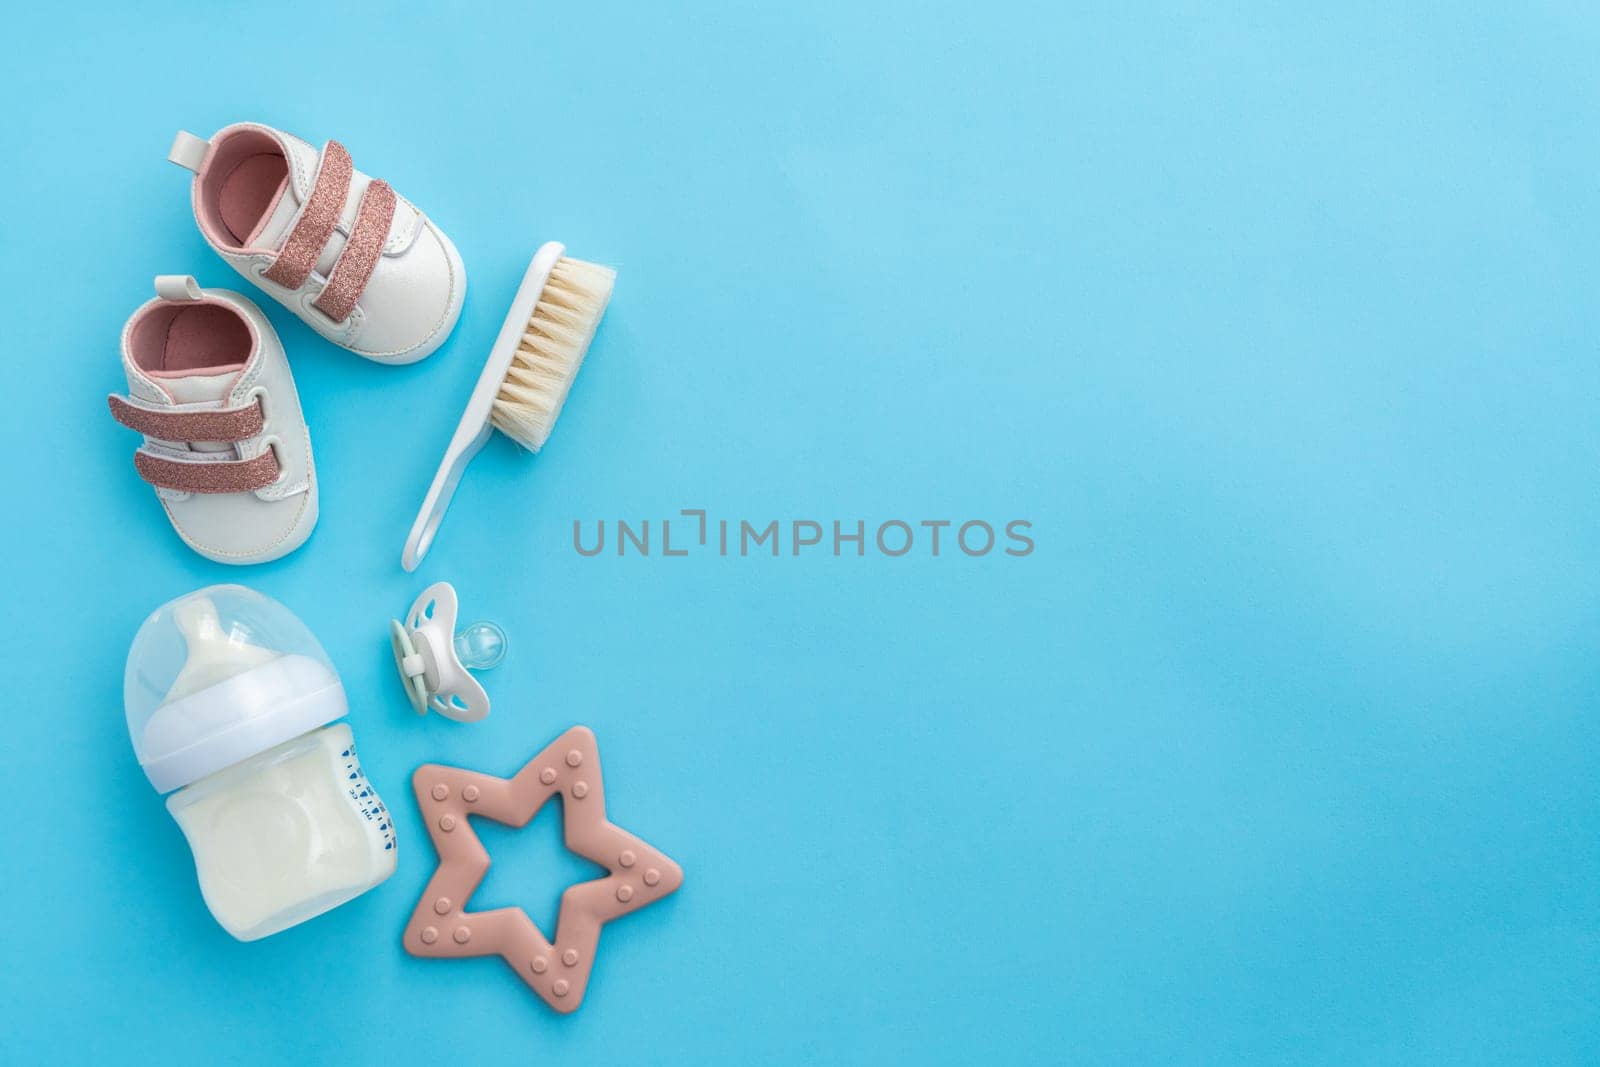 From above, an assortment of newborn accessories is neatly presented on a refreshing blue